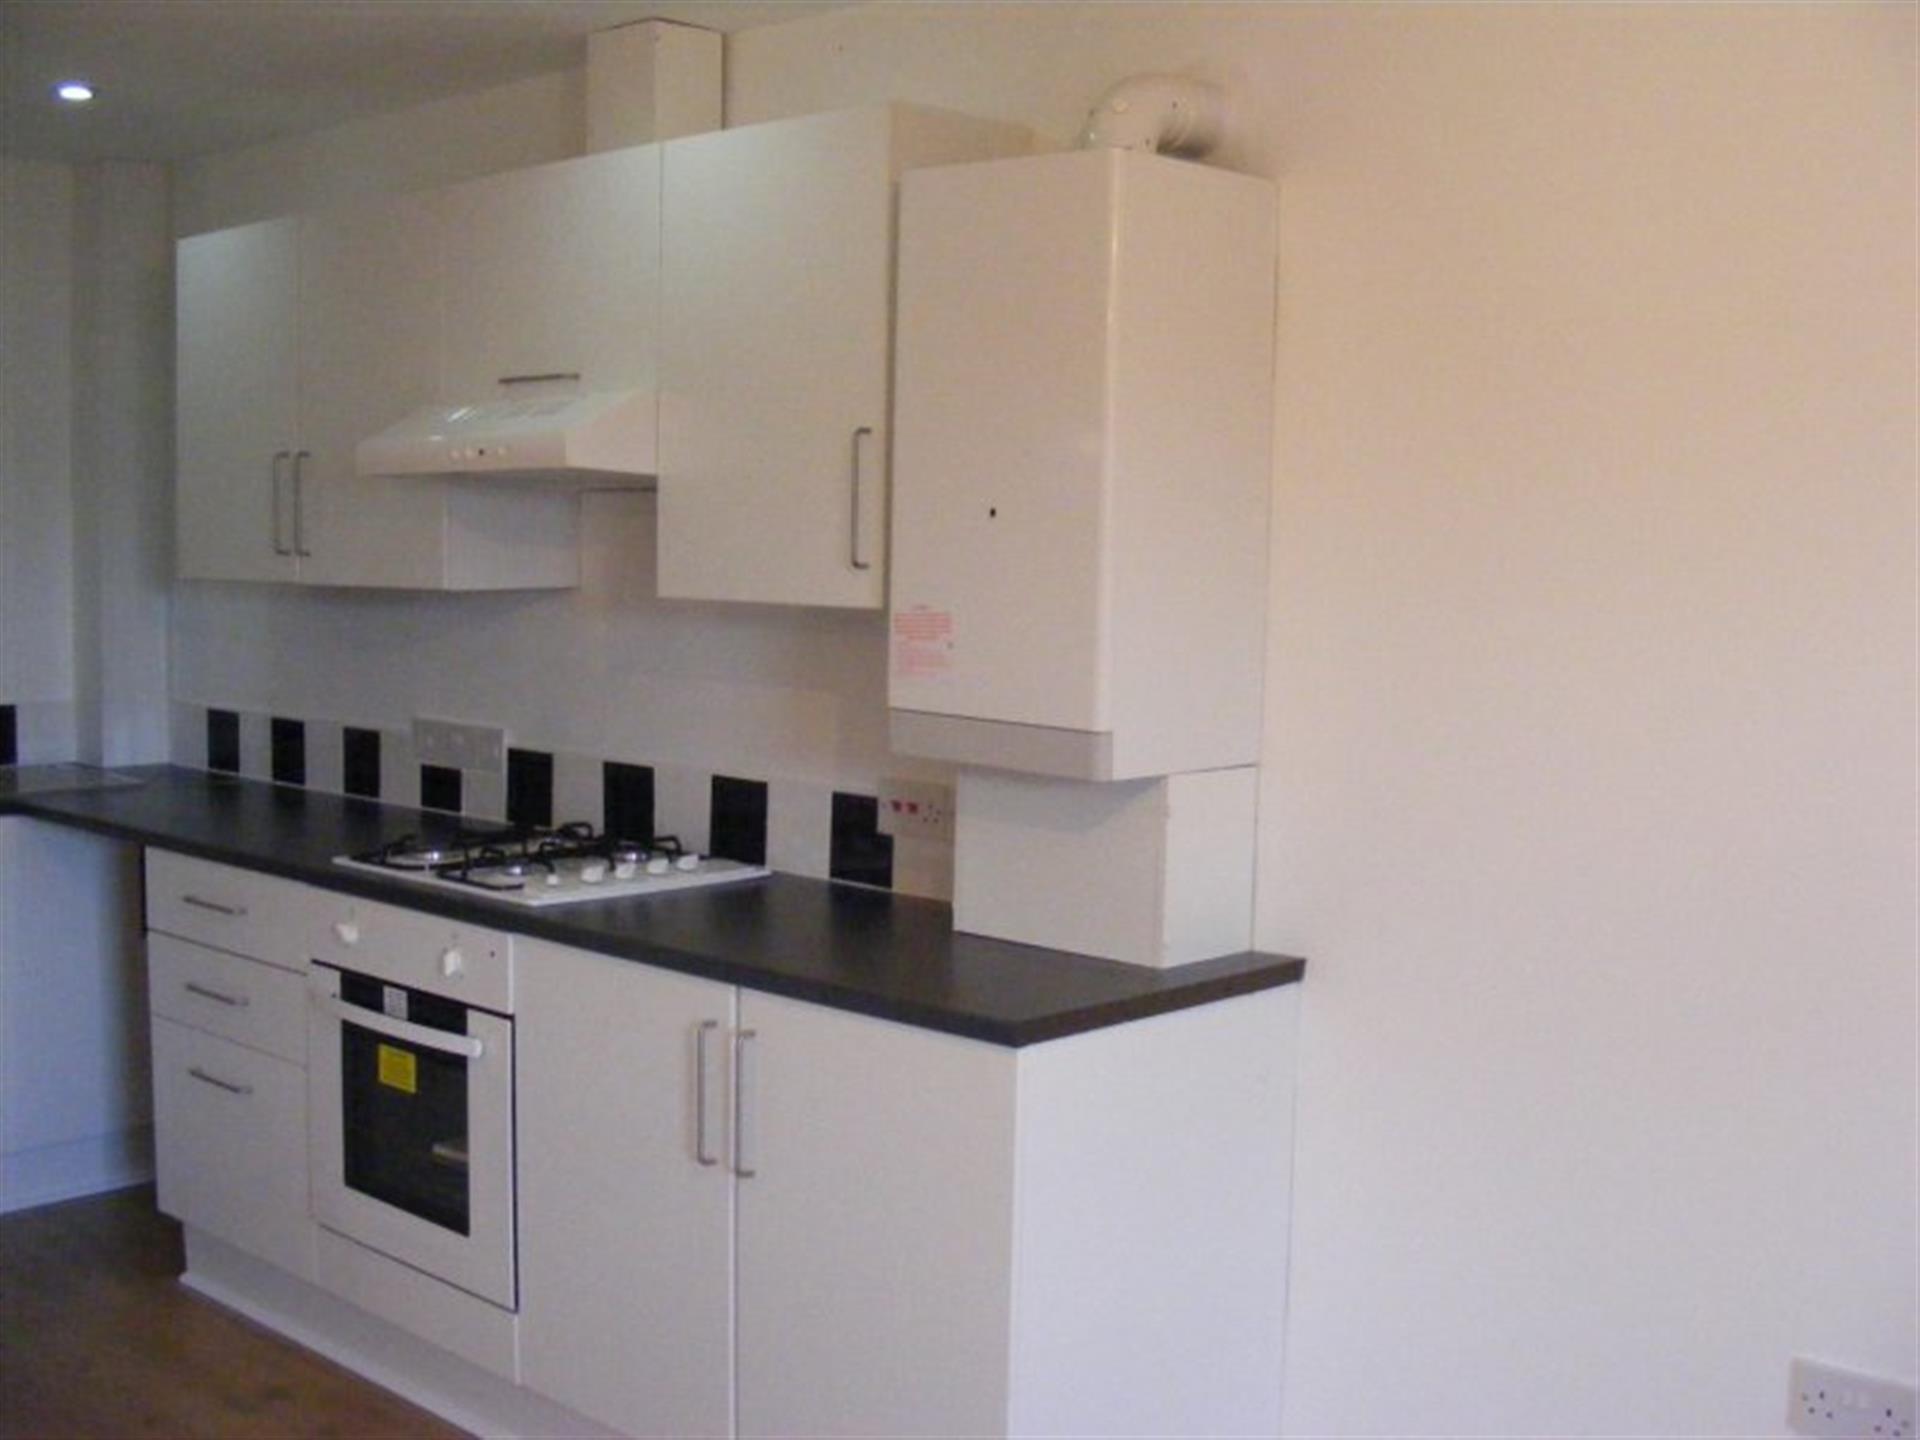 2 bedroom flat flat / apartment To Let in Bishop Auckland - Main Image.